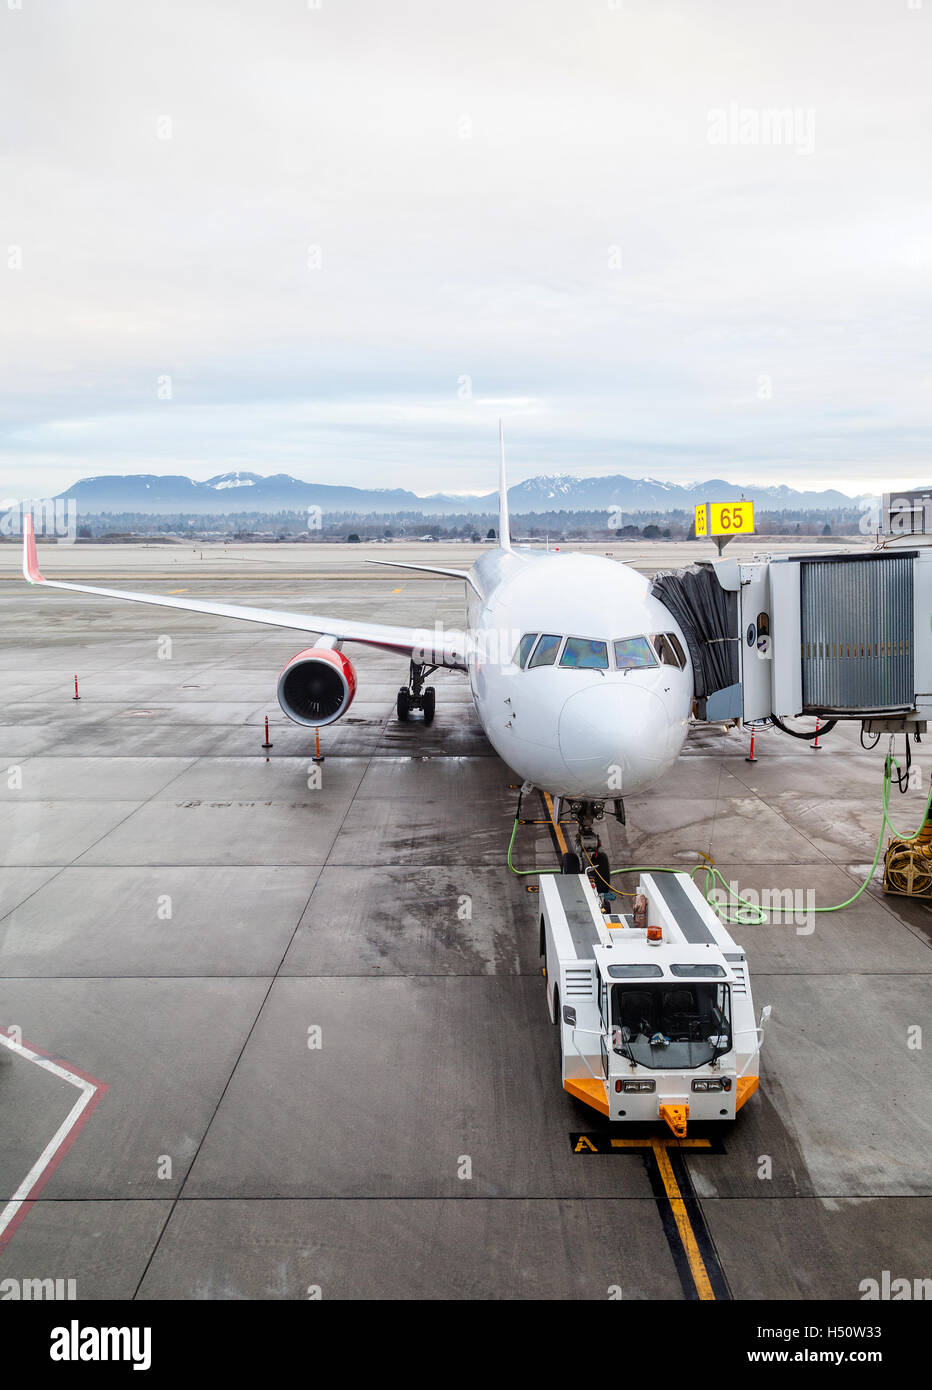 A commercial aircraft on the tarmac being serviced at the passenger terminal of Vancouver International Airport YVR. Stock Photo